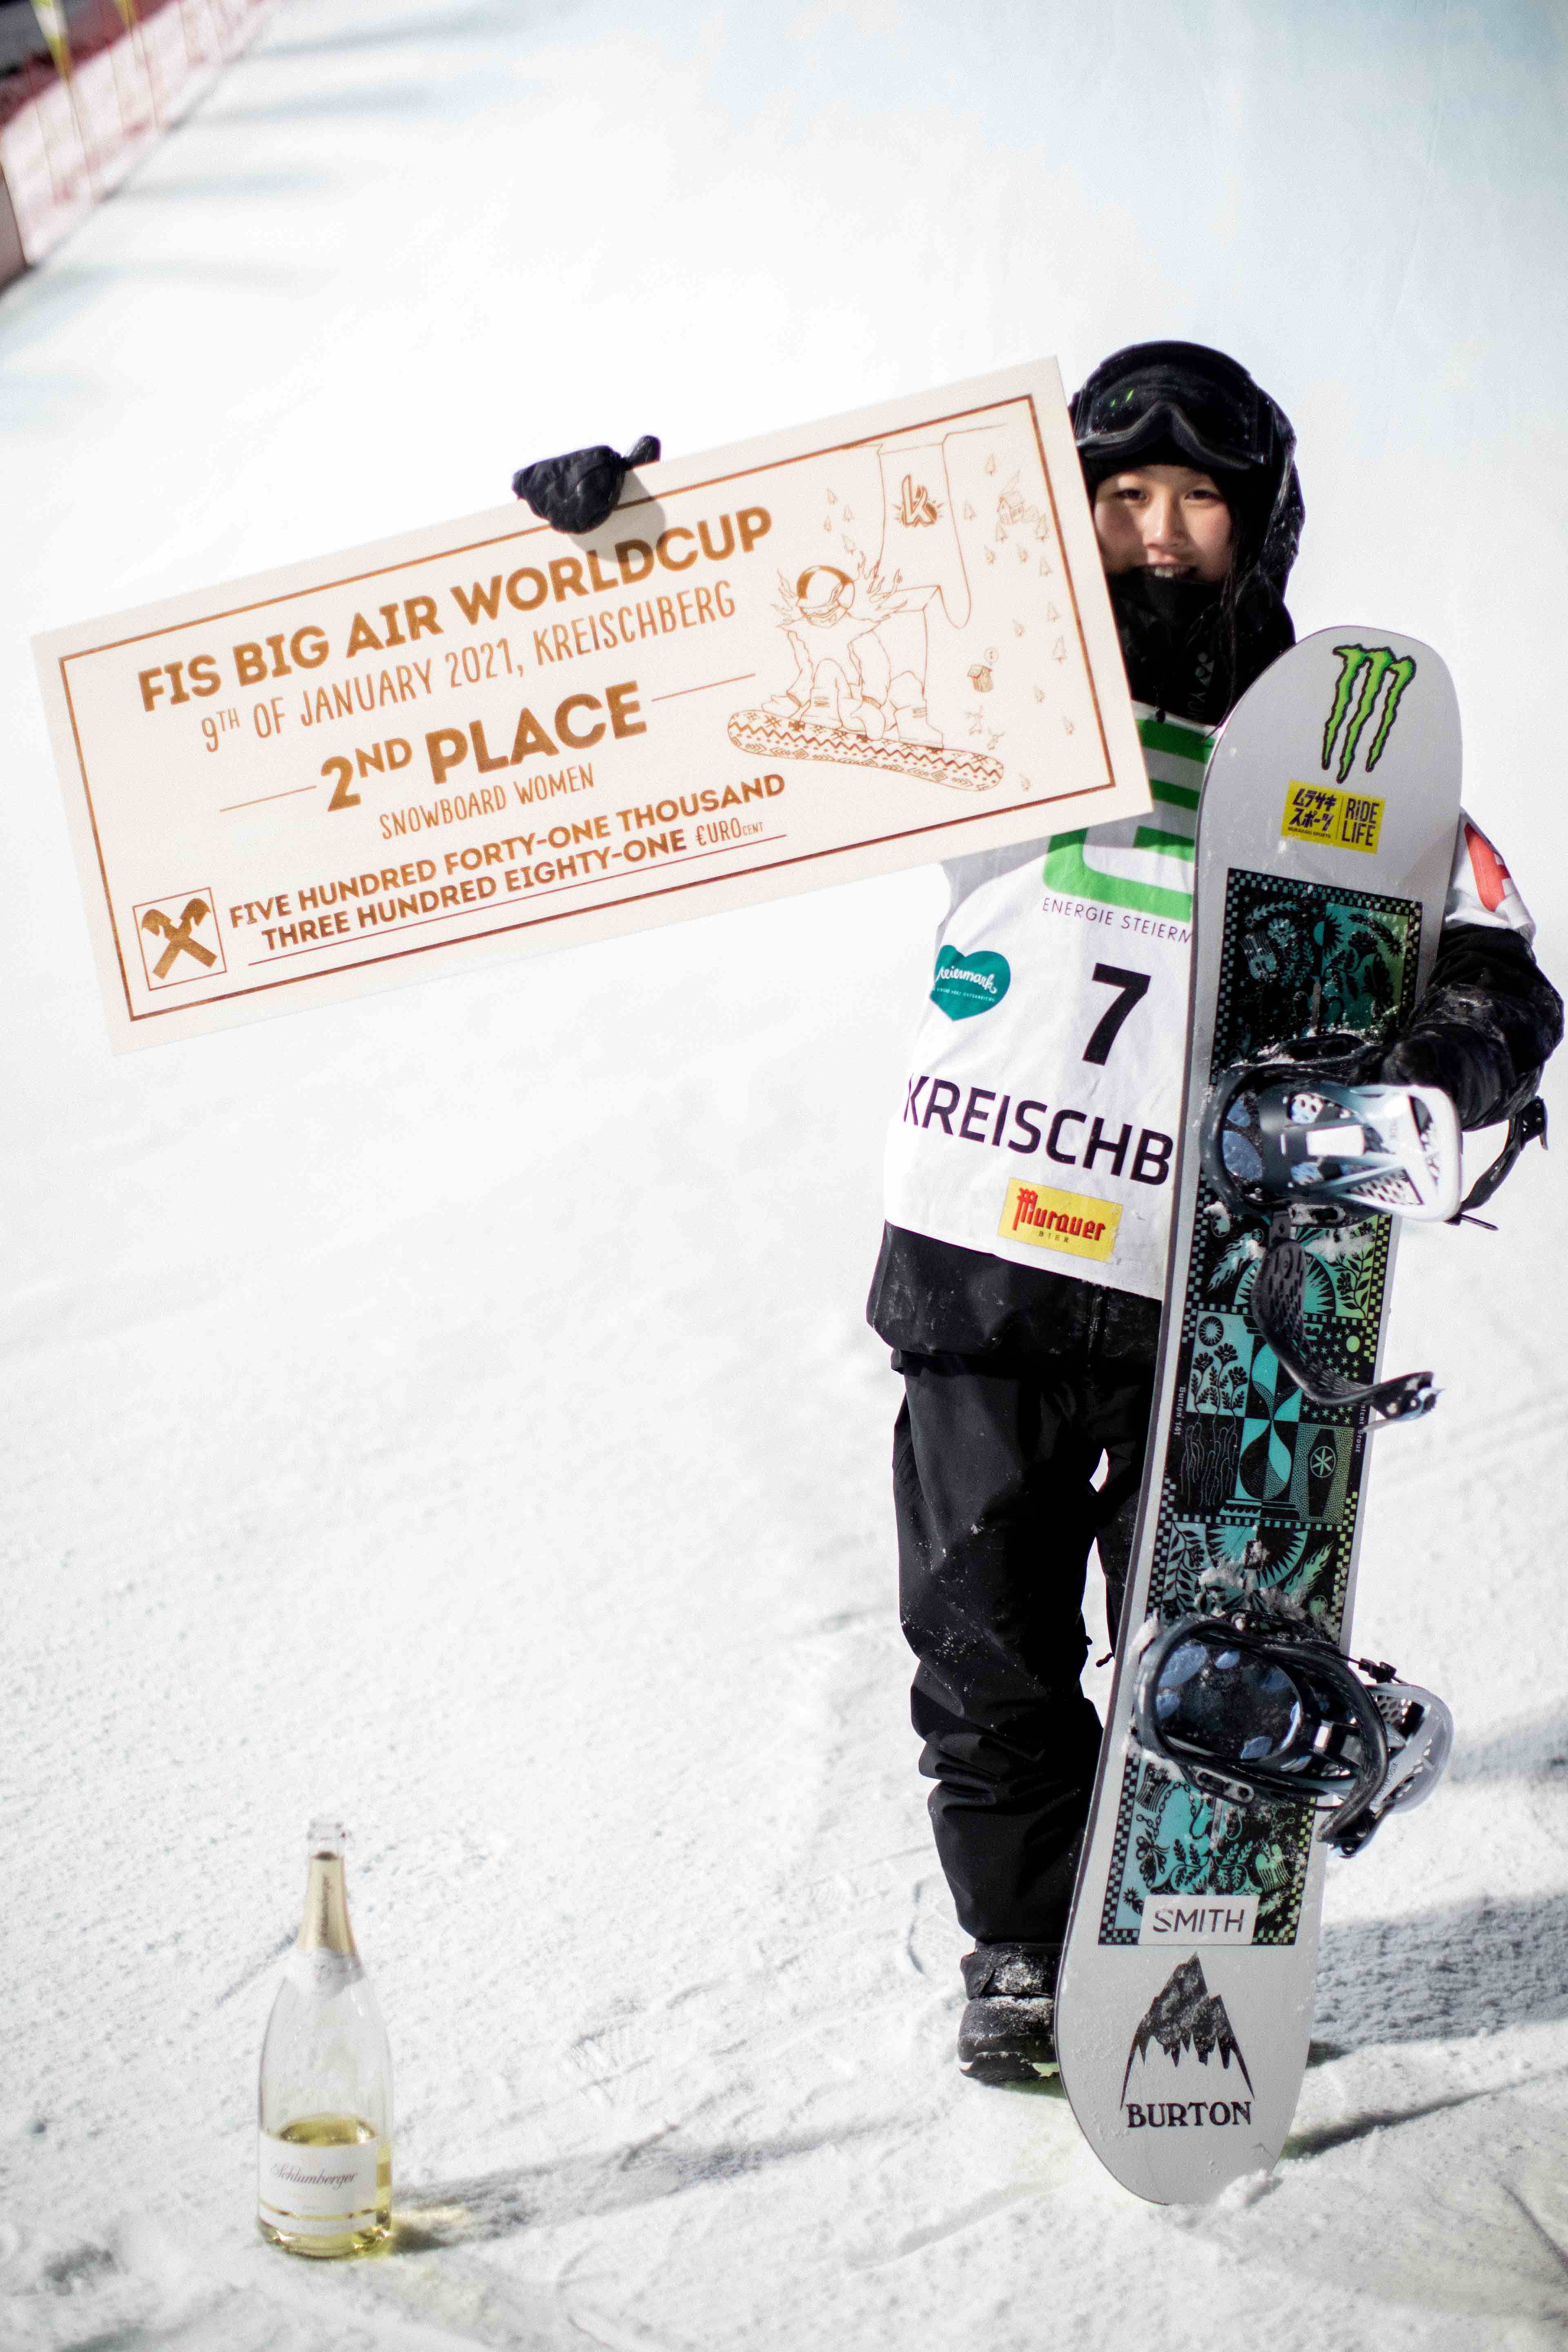 Monster Energy's Kokomo Murase Claims Silver in Women's Snowboard Big Air at the FIS Snowboard Park & Pipe World Cup in Kreischberg, Austria